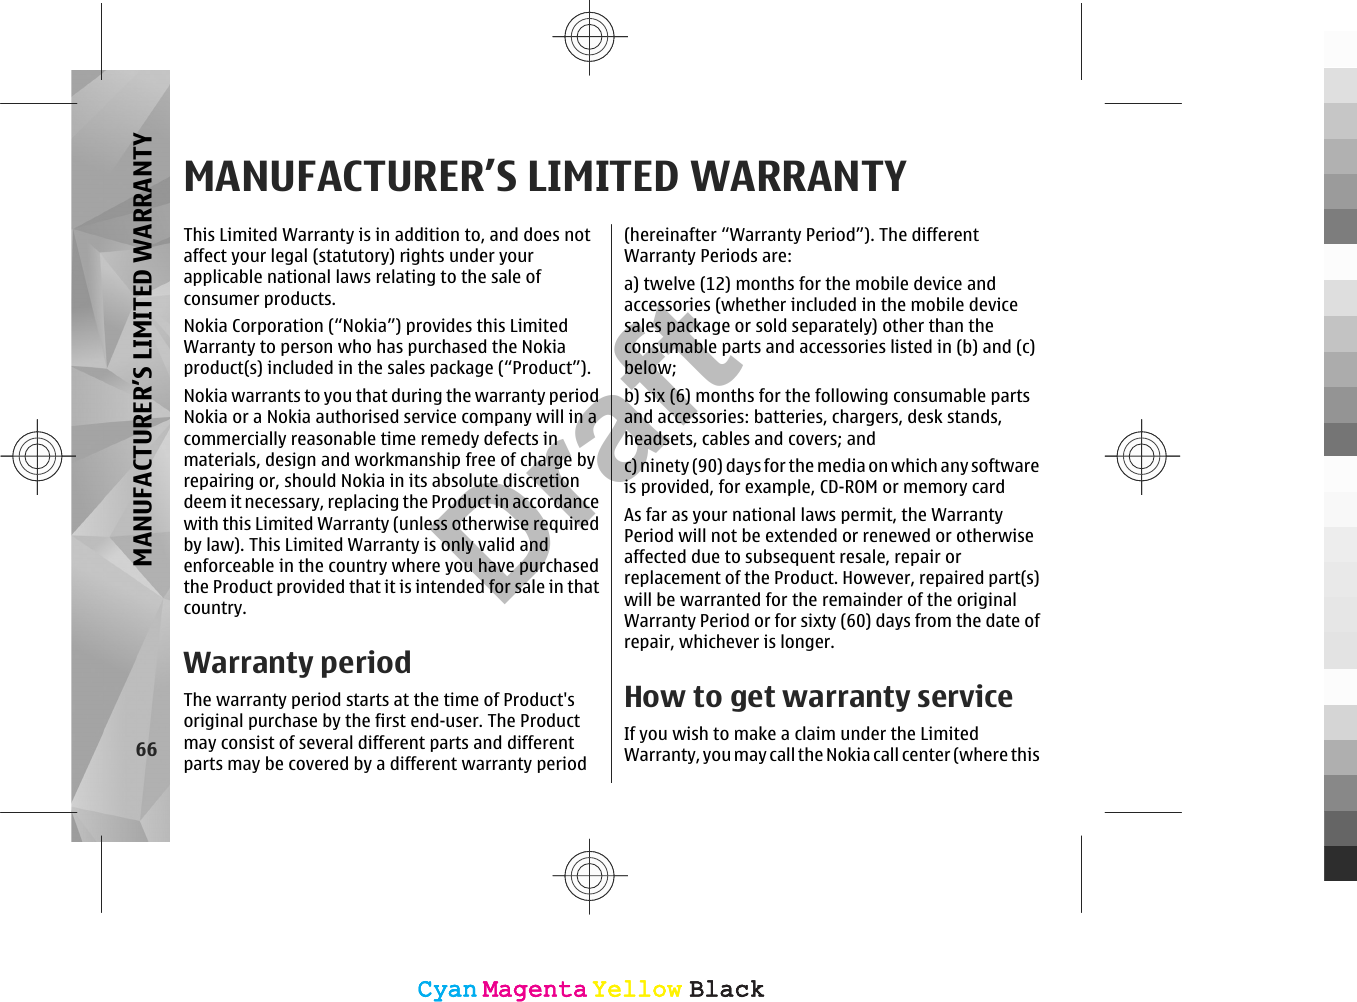 MANUFACTURER’S LIMITED WARRANTYThis Limited Warranty is in addition to, and does notaffect your legal (statutory) rights under yourapplicable national laws relating to the sale ofconsumer products.Nokia Corporation (“Nokia”) provides this LimitedWarranty to person who has purchased the Nokiaproduct(s) included in the sales package (“Product”).Nokia warrants to you that during the warranty periodNokia or a Nokia authorised service company will in acommercially reasonable time remedy defects inmaterials, design and workmanship free of charge byrepairing or, should Nokia in its absolute discretiondeem it necessary, replacing the Product in accordancewith this Limited Warranty (unless otherwise requiredby law). This Limited Warranty is only valid andenforceable in the country where you have purchasedthe Product provided that it is intended for sale in thatcountry.Warranty periodThe warranty period starts at the time of Product&apos;soriginal purchase by the first end-user. The Productmay consist of several different parts and differentparts may be covered by a different warranty period(hereinafter “Warranty Period”). The differentWarranty Periods are:a) twelve (12) months for the mobile device andaccessories (whether included in the mobile devicesales package or sold separately) other than theconsumable parts and accessories listed in (b) and (c)below;b) six (6) months for the following consumable partsand accessories: batteries, chargers, desk stands,headsets, cables and covers; andc) ninety (90) days for the media on which any softwareis provided, for example, CD-ROM or memory cardAs far as your national laws permit, the WarrantyPeriod will not be extended or renewed or otherwiseaffected due to subsequent resale, repair orreplacement of the Product. However, repaired part(s)will be warranted for the remainder of the originalWarranty Period or for sixty (60) days from the date ofrepair, whichever is longer.How to get warranty serviceIf you wish to make a claim under the LimitedWarranty, you may call the Nokia call center (where this66MANUFACTURER’S LIMITED WARRANTYCyanCyanMagentaMagentaYellowYellowBlackBlackCyanCyanMagentaMagentaYellowYellowBlackBlackDraft